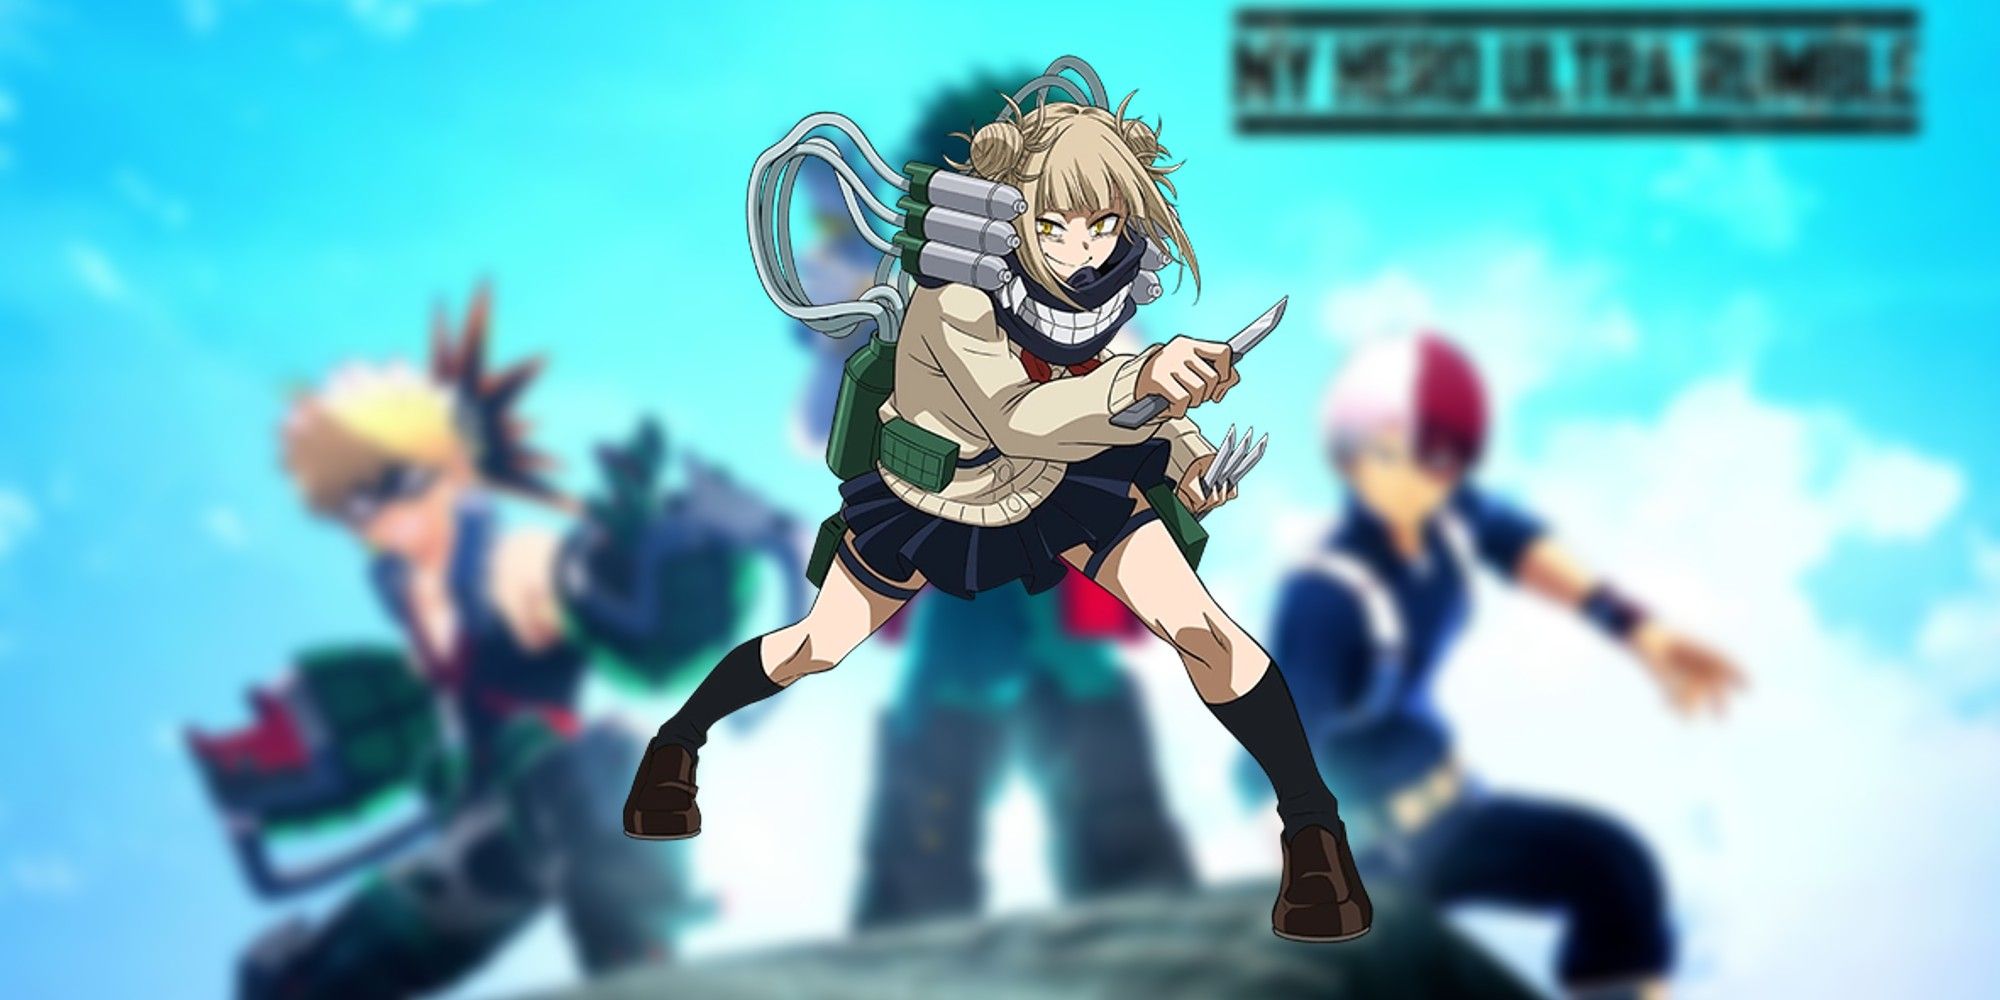 toga in front of the my hero ultra rumble cover